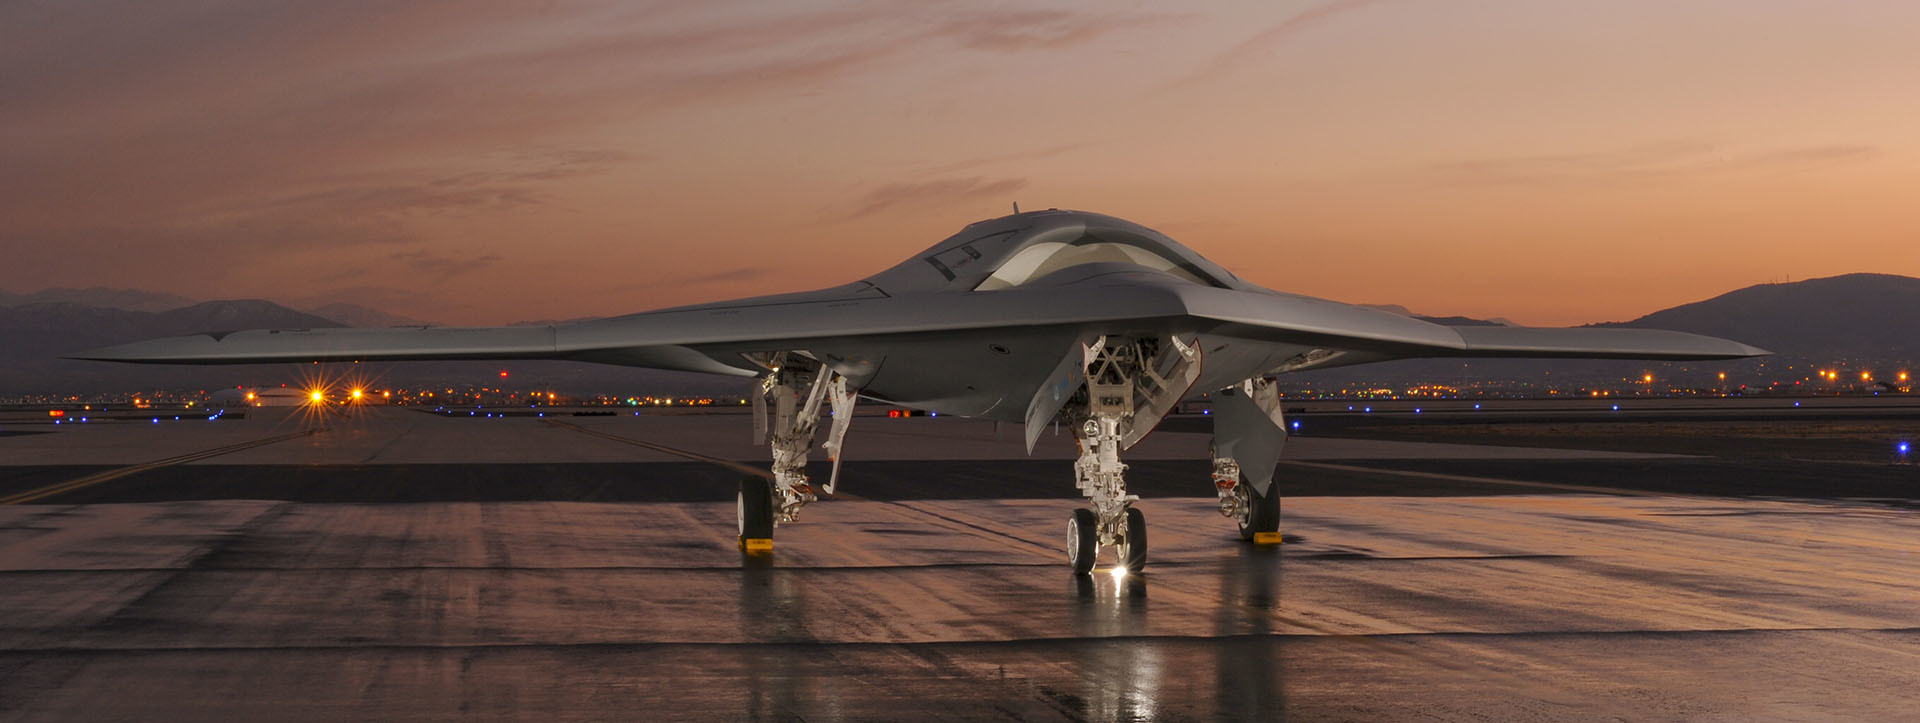 X-47B Unmanned Aircraft